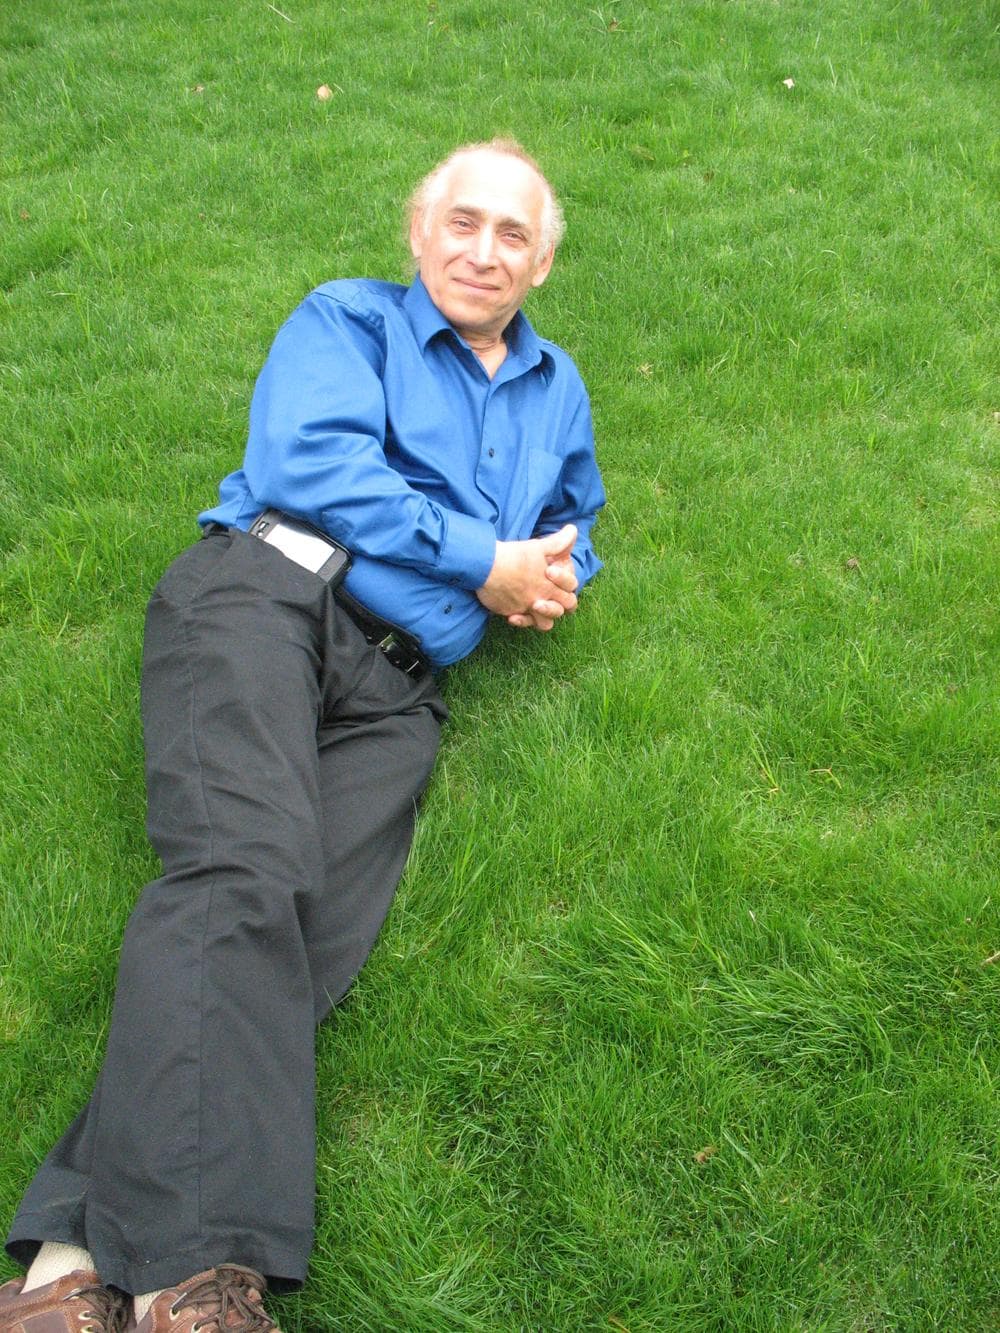 Jackson Madnick, the investor of Pearls Premium grass seed, lies down on lawn seeded with his ultra low maintainence grass. (Photo by Monica Brady-Myerov)